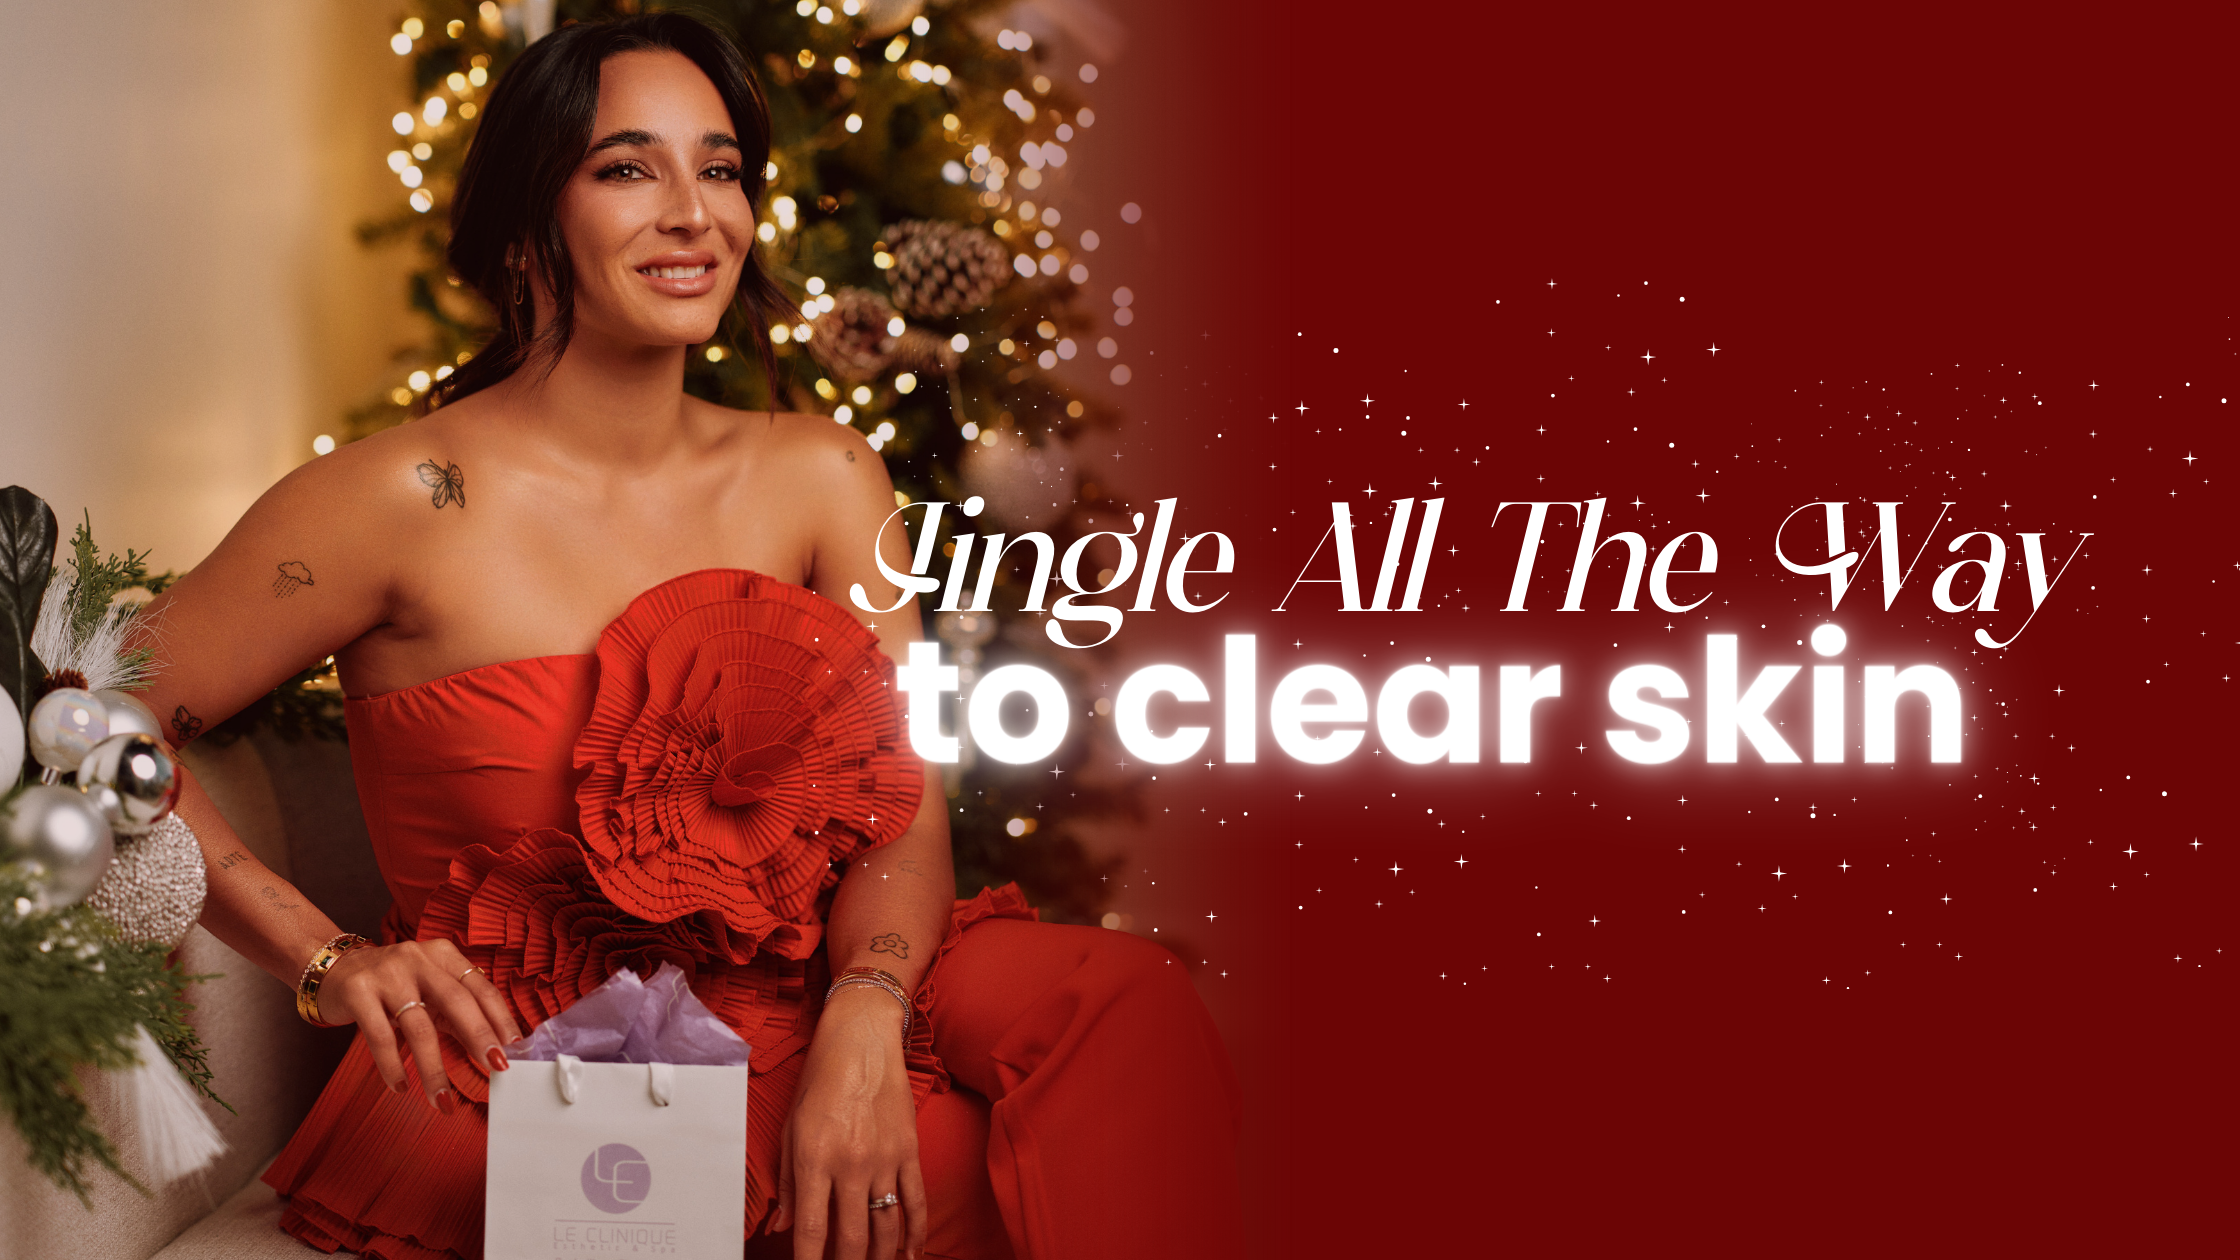 Jingle All The Way to Clear Skin